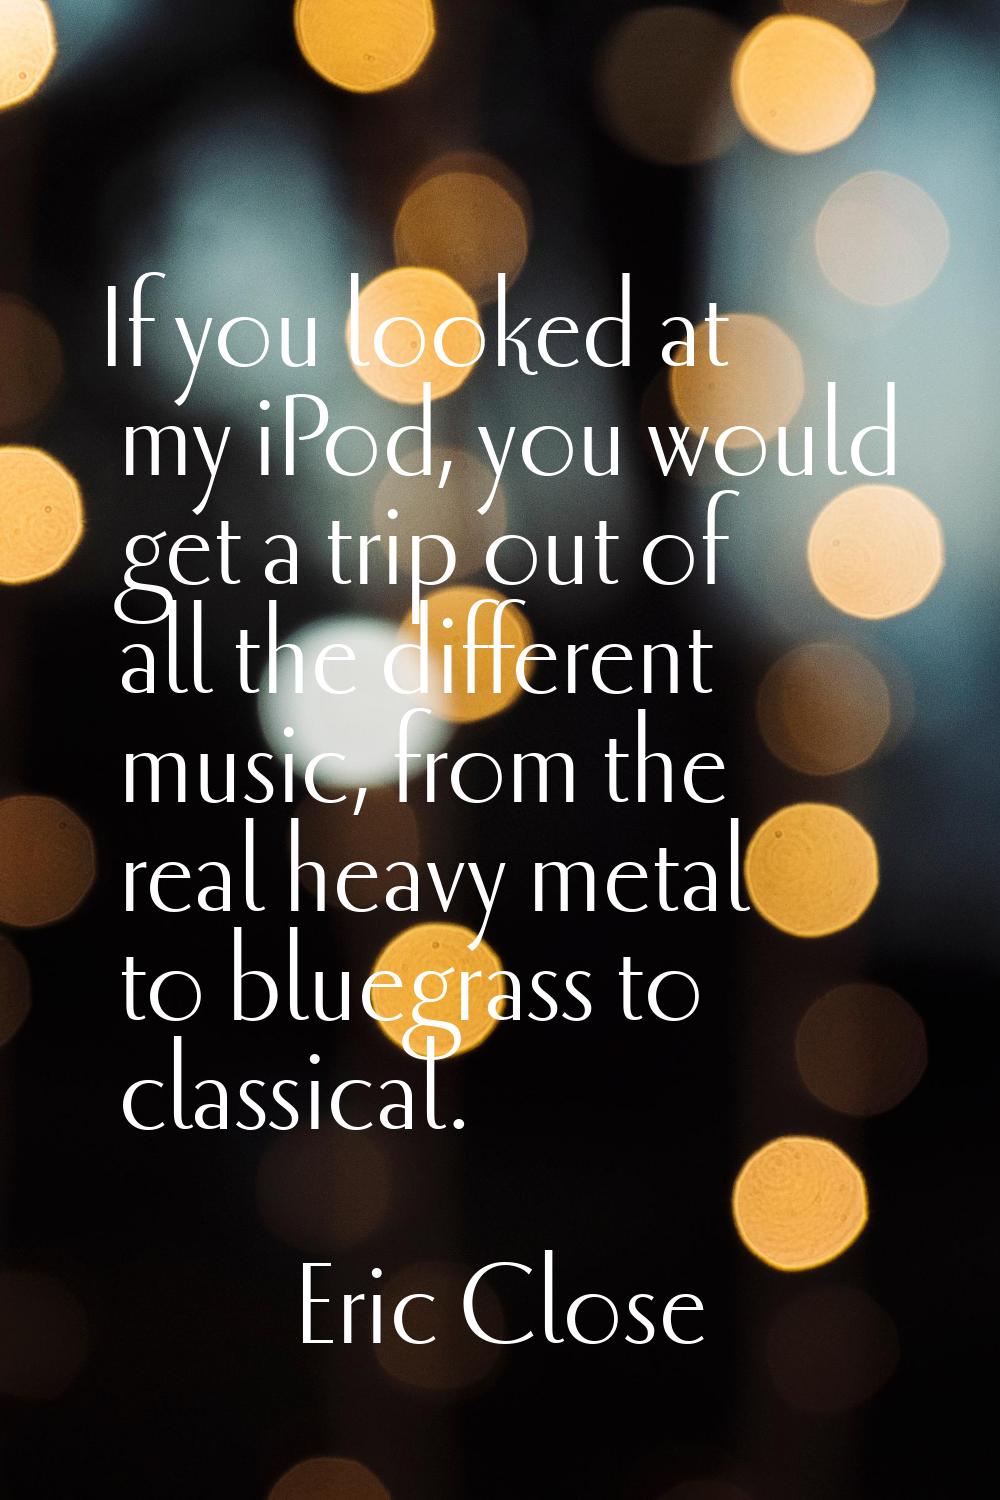 If you looked at my iPod, you would get a trip out of all the different music, from the real heavy 